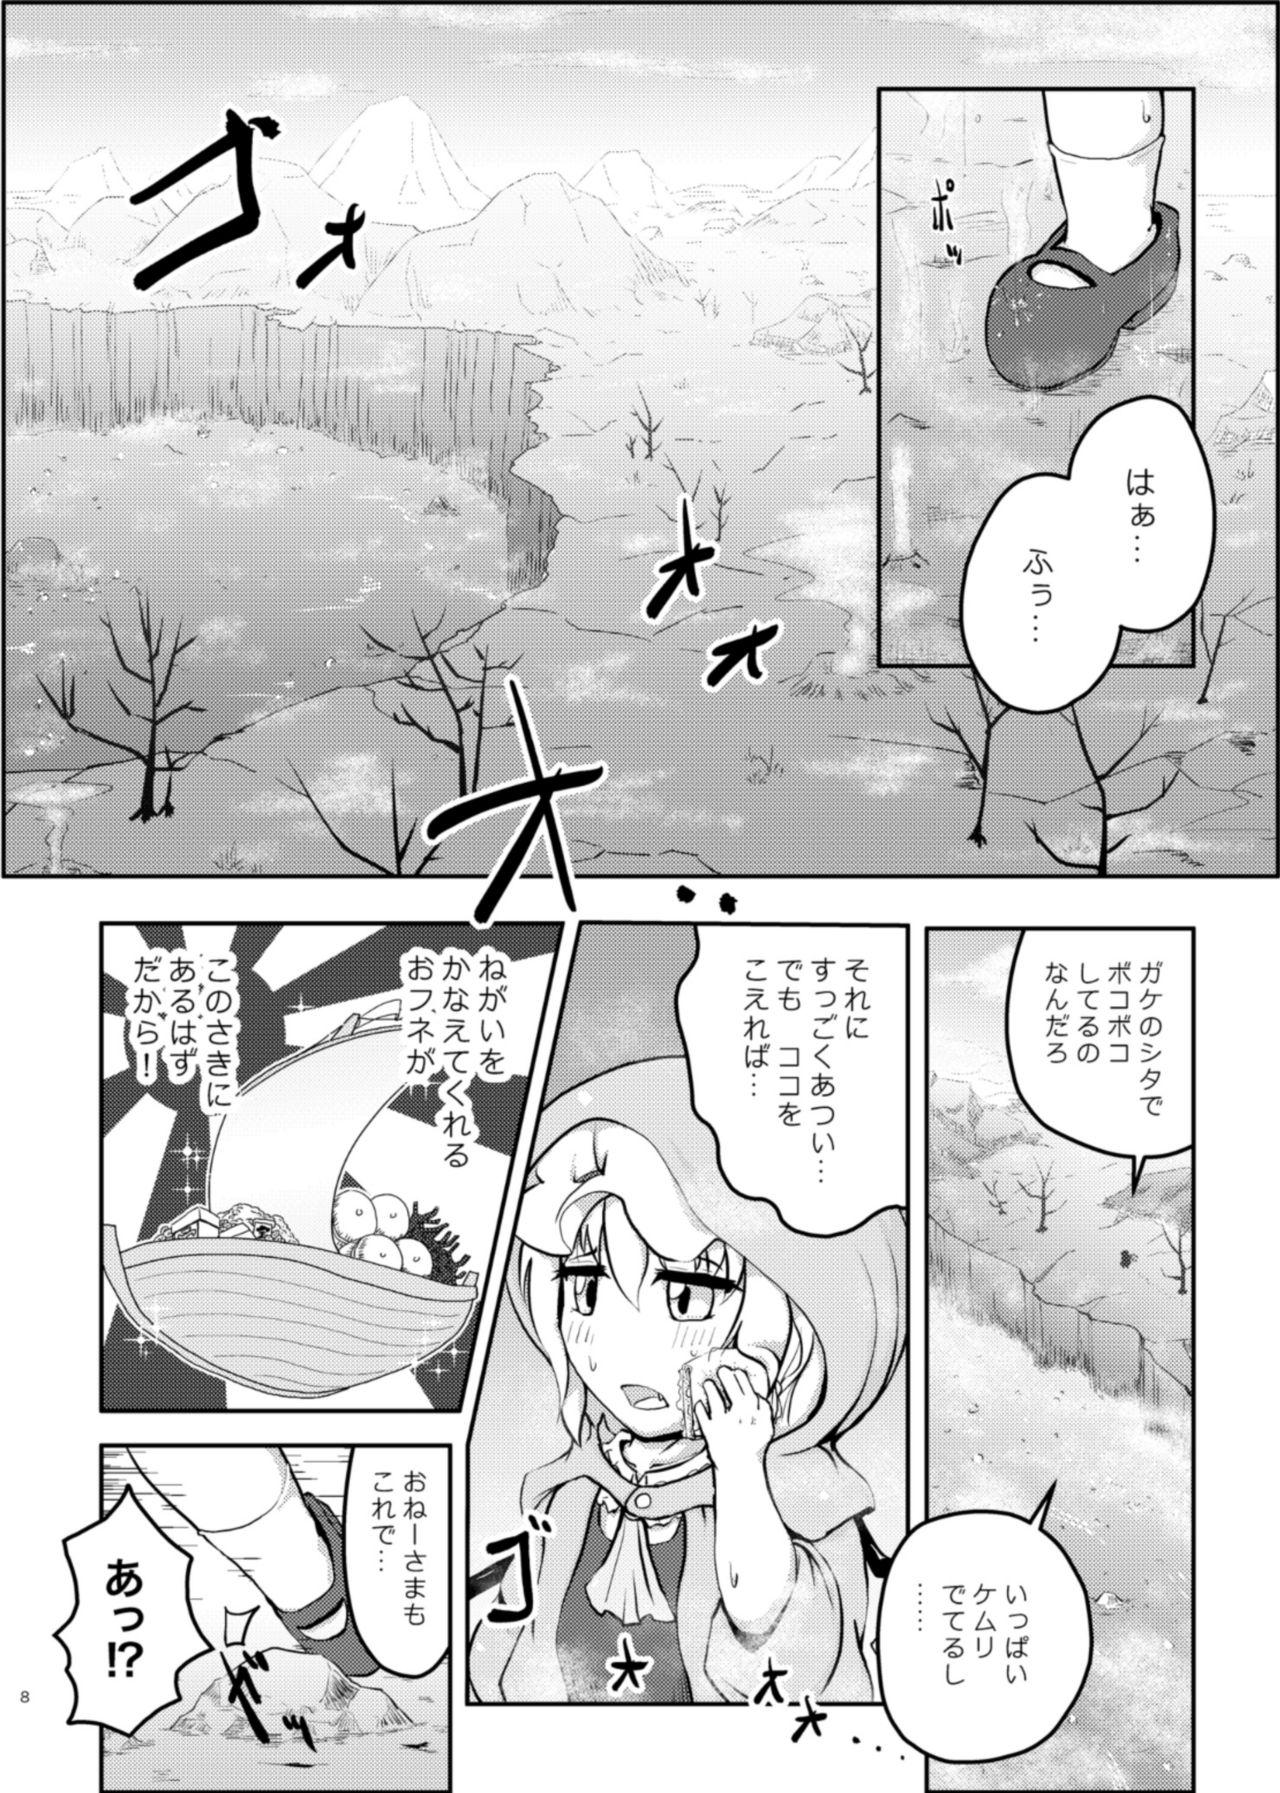 Viet Nam Scarlet Conflict 2 - Touhou project Reverse Cowgirl - Page 8